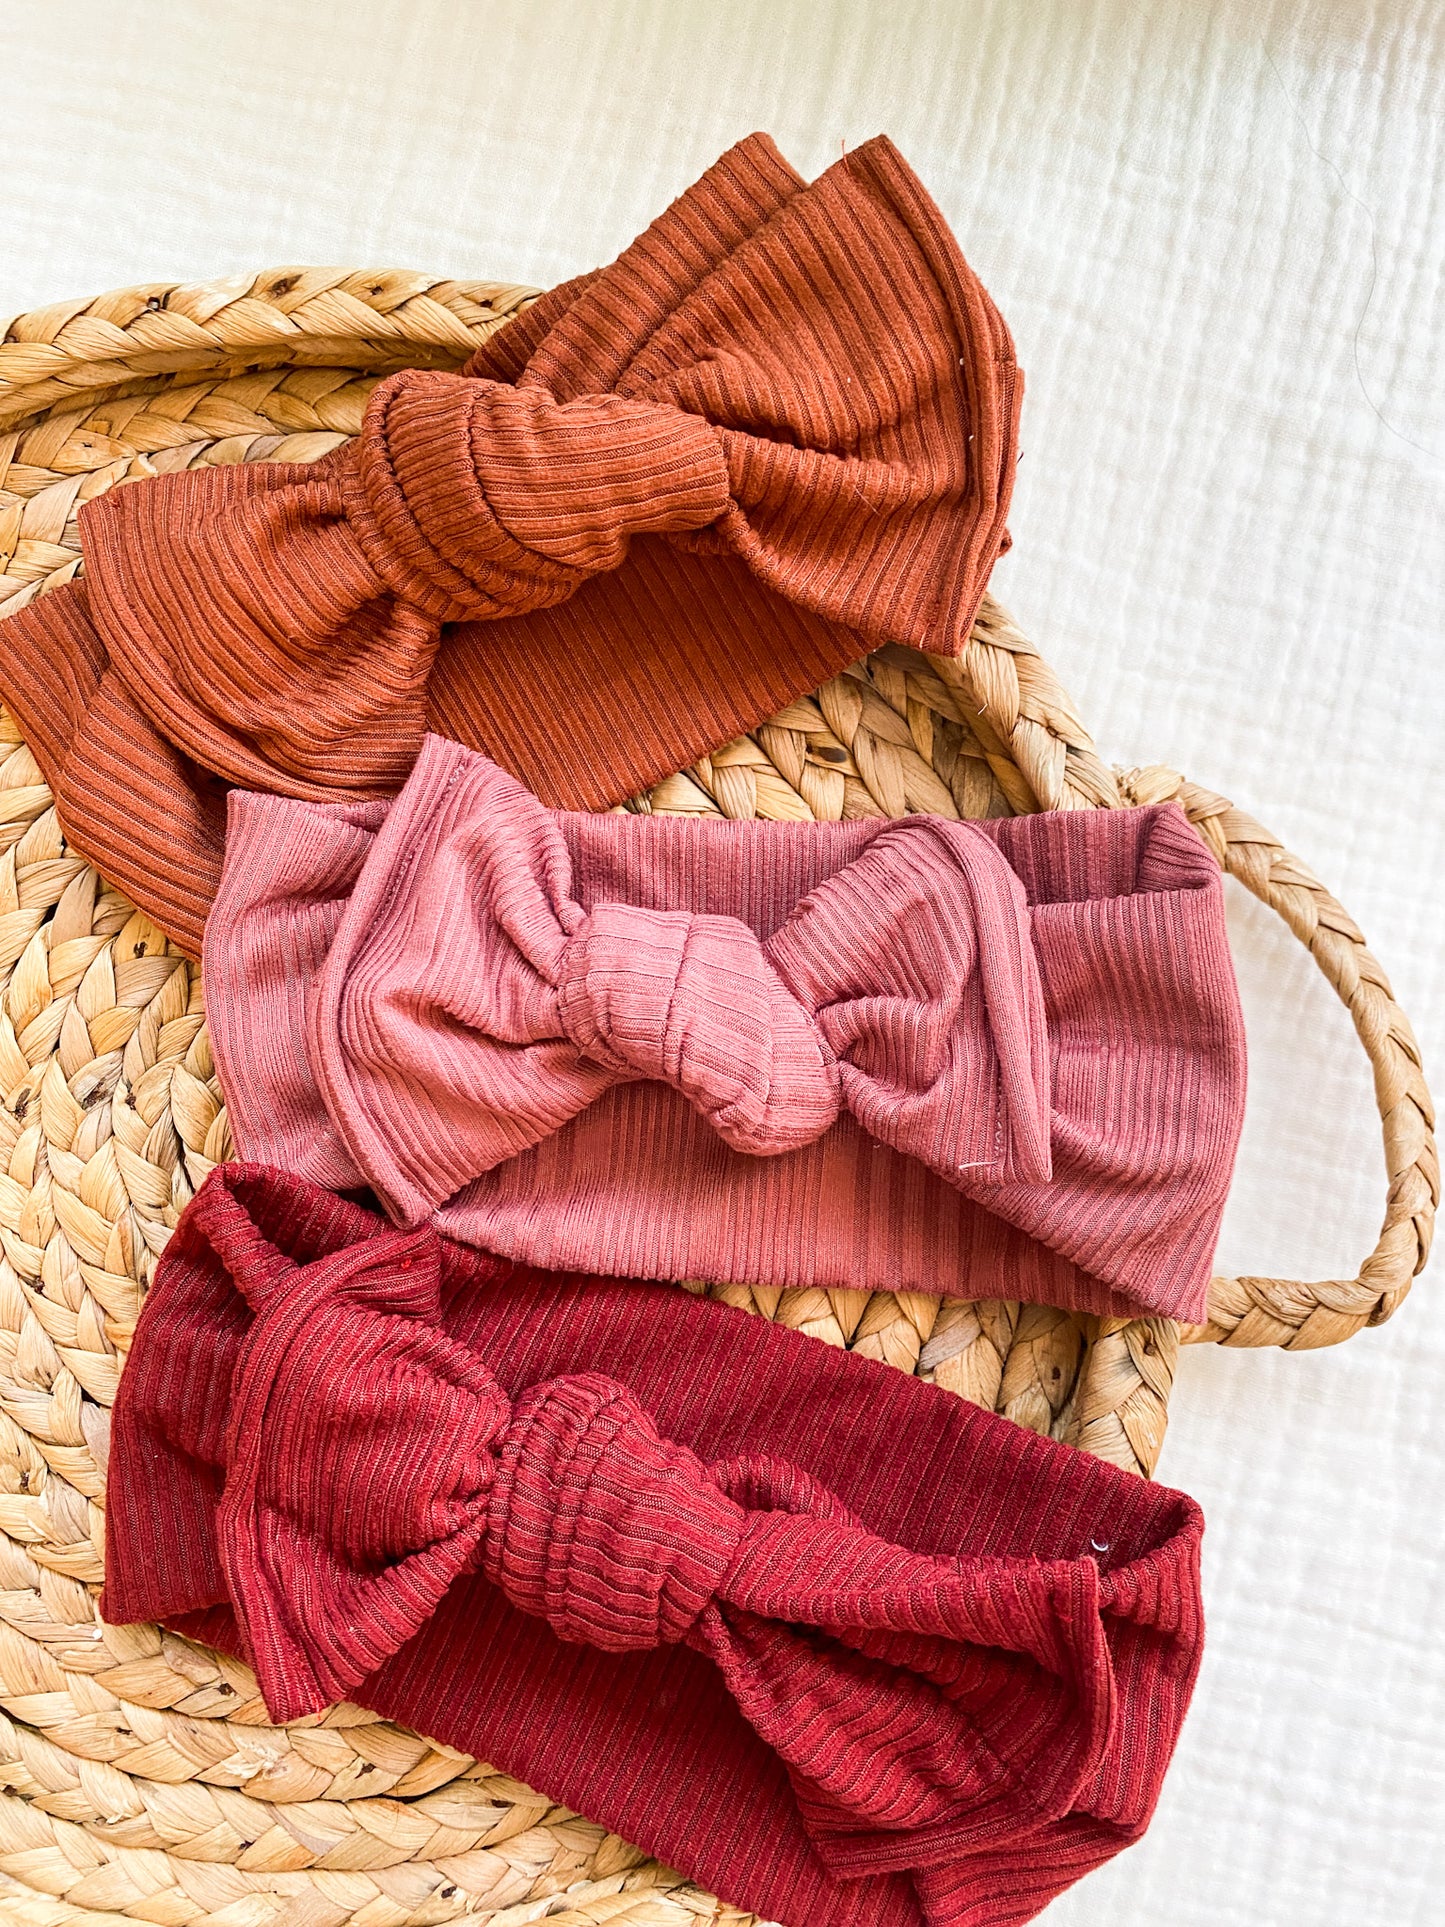 Cozy and Comfy Baby Girl Headbands | Stretchy Hair Bows | Red, Terra Cotta, Pink  | Cozy Headwraps | Stretchy Knit | Baby Head bows | Soft Fabric | Baby